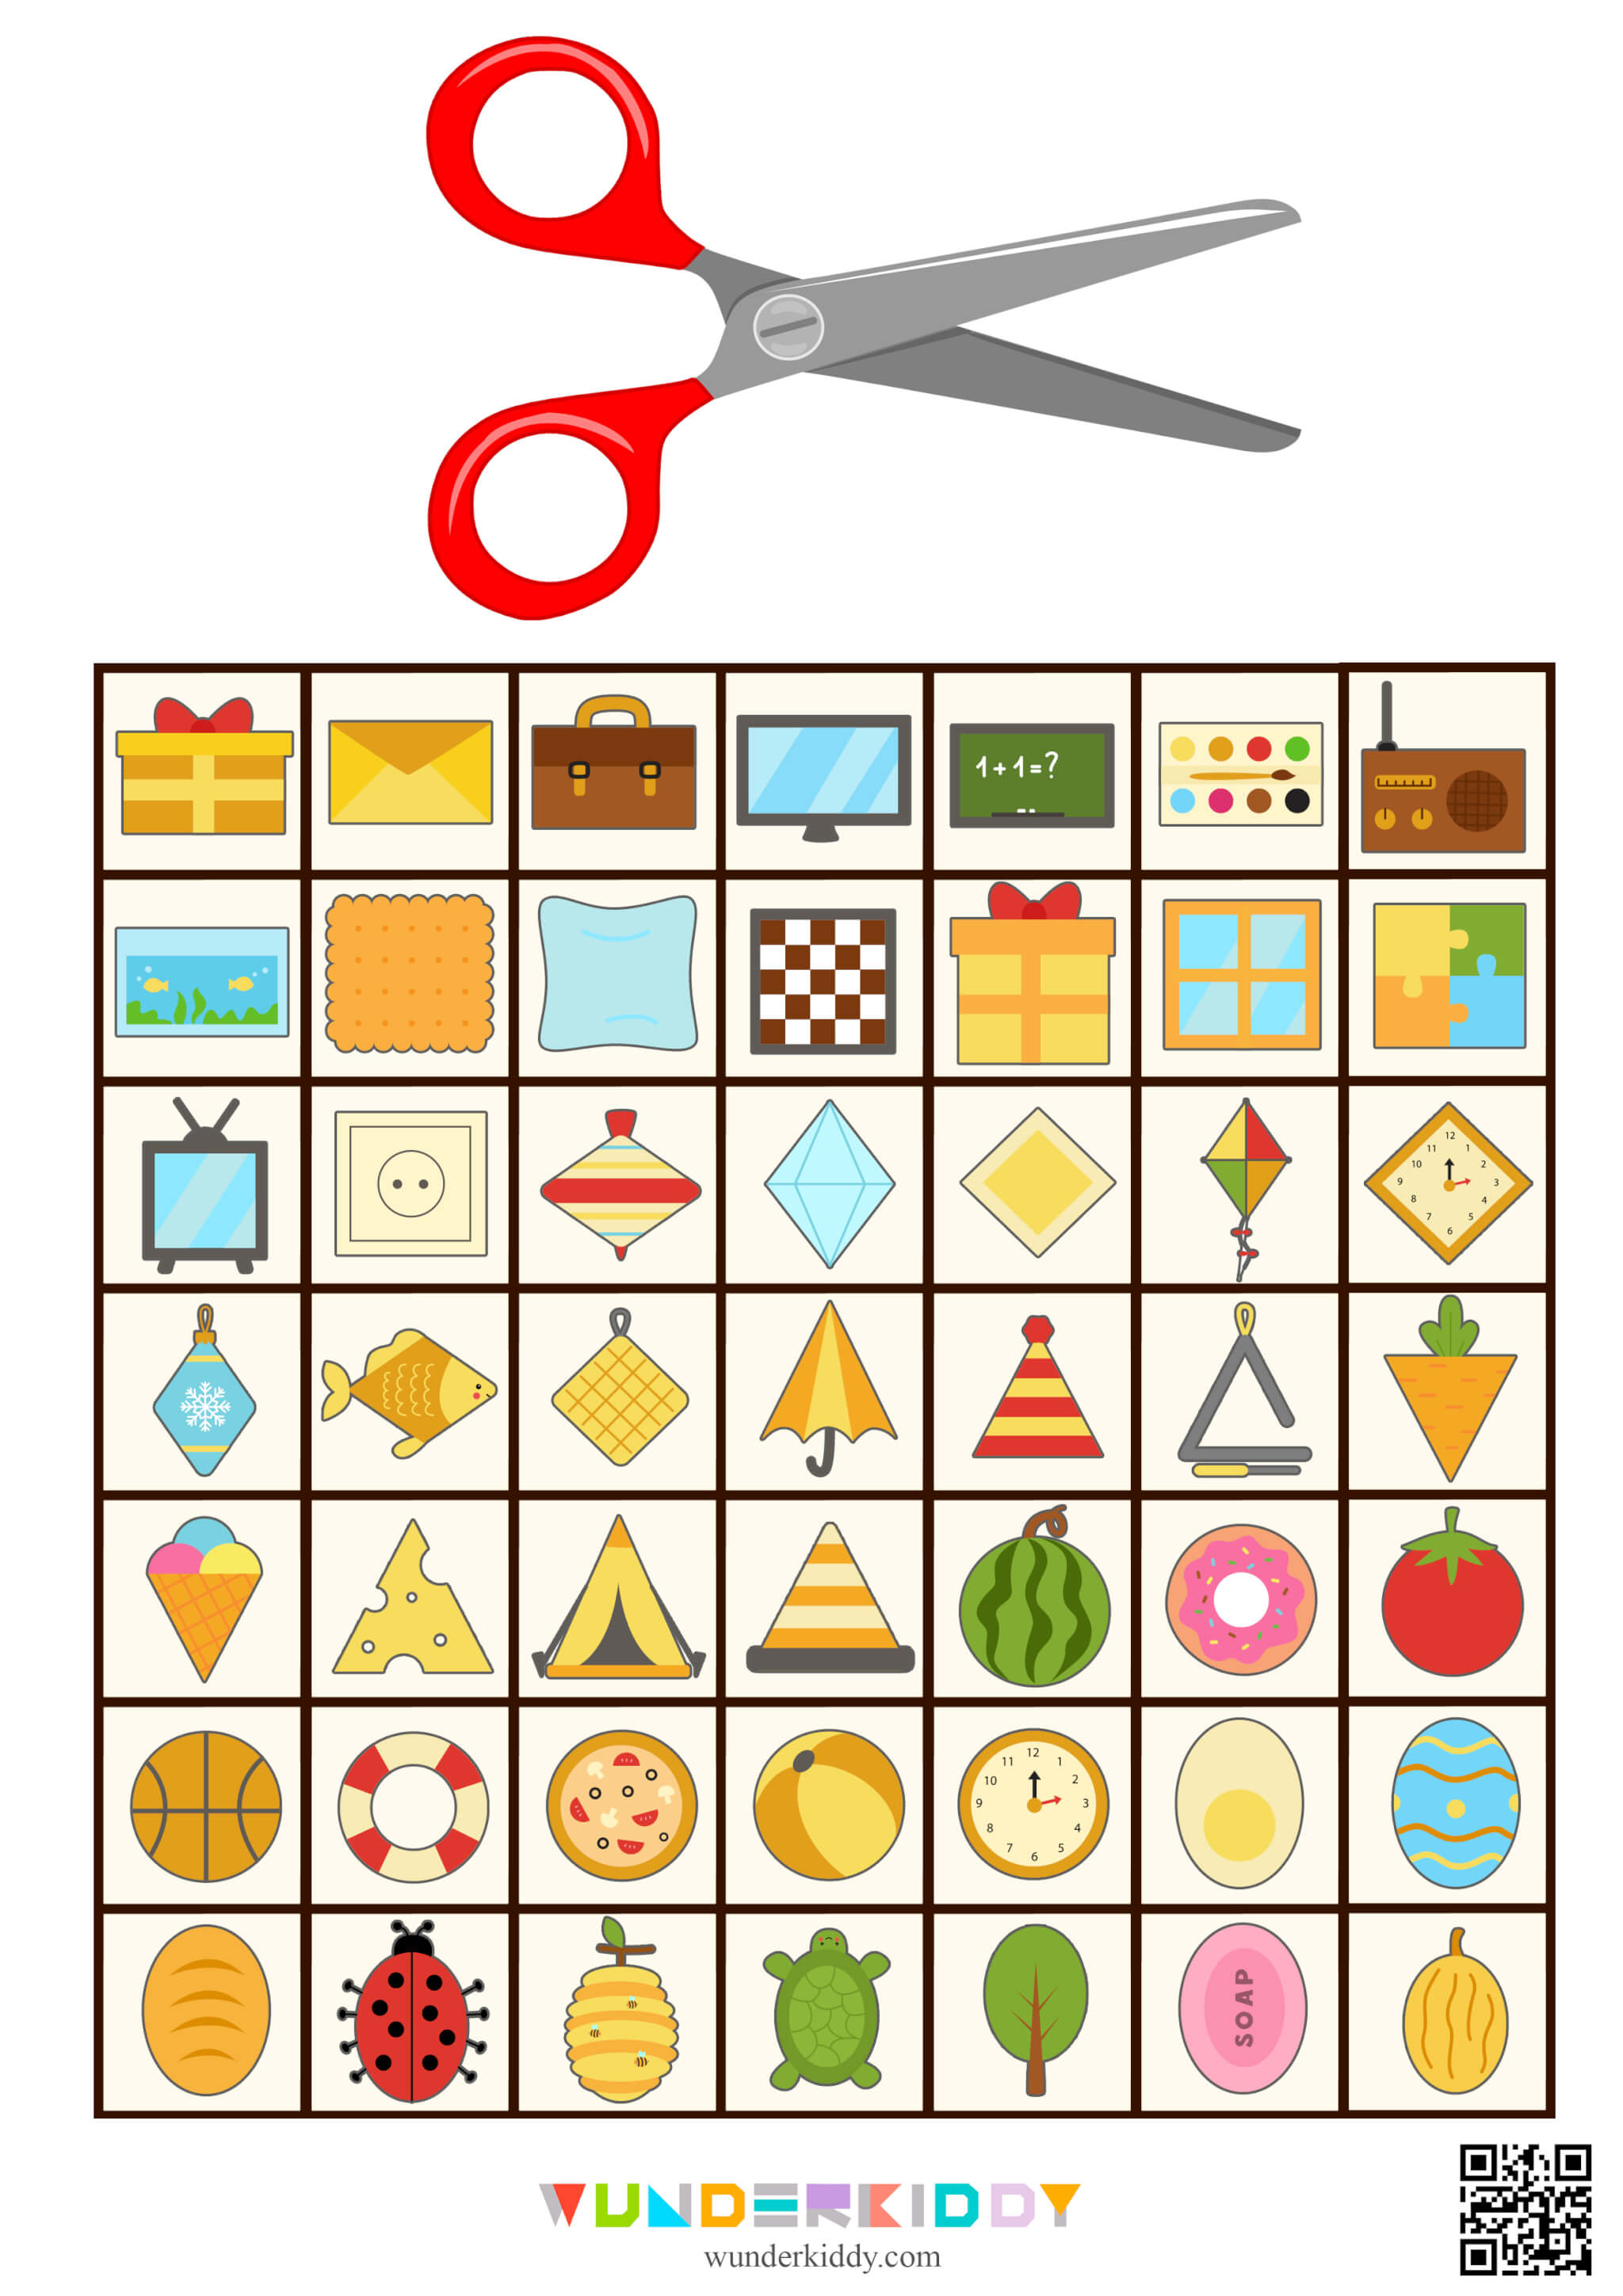 Learn and Sort 2D Geometric Shapes - Image 2